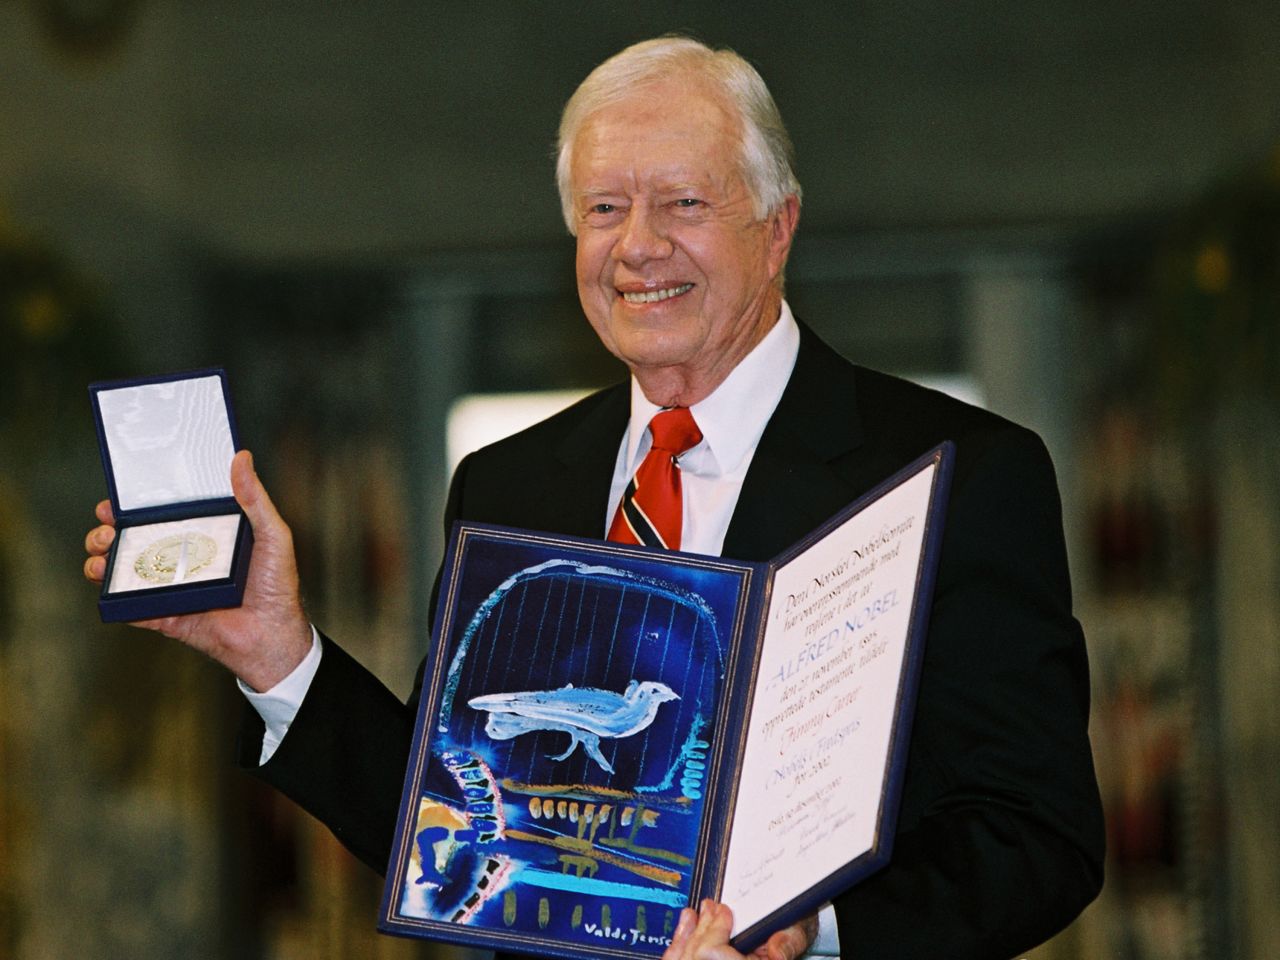 Jimmy Carter was awarded the Nobel for his efforts to promote peace, democracy and human rights.